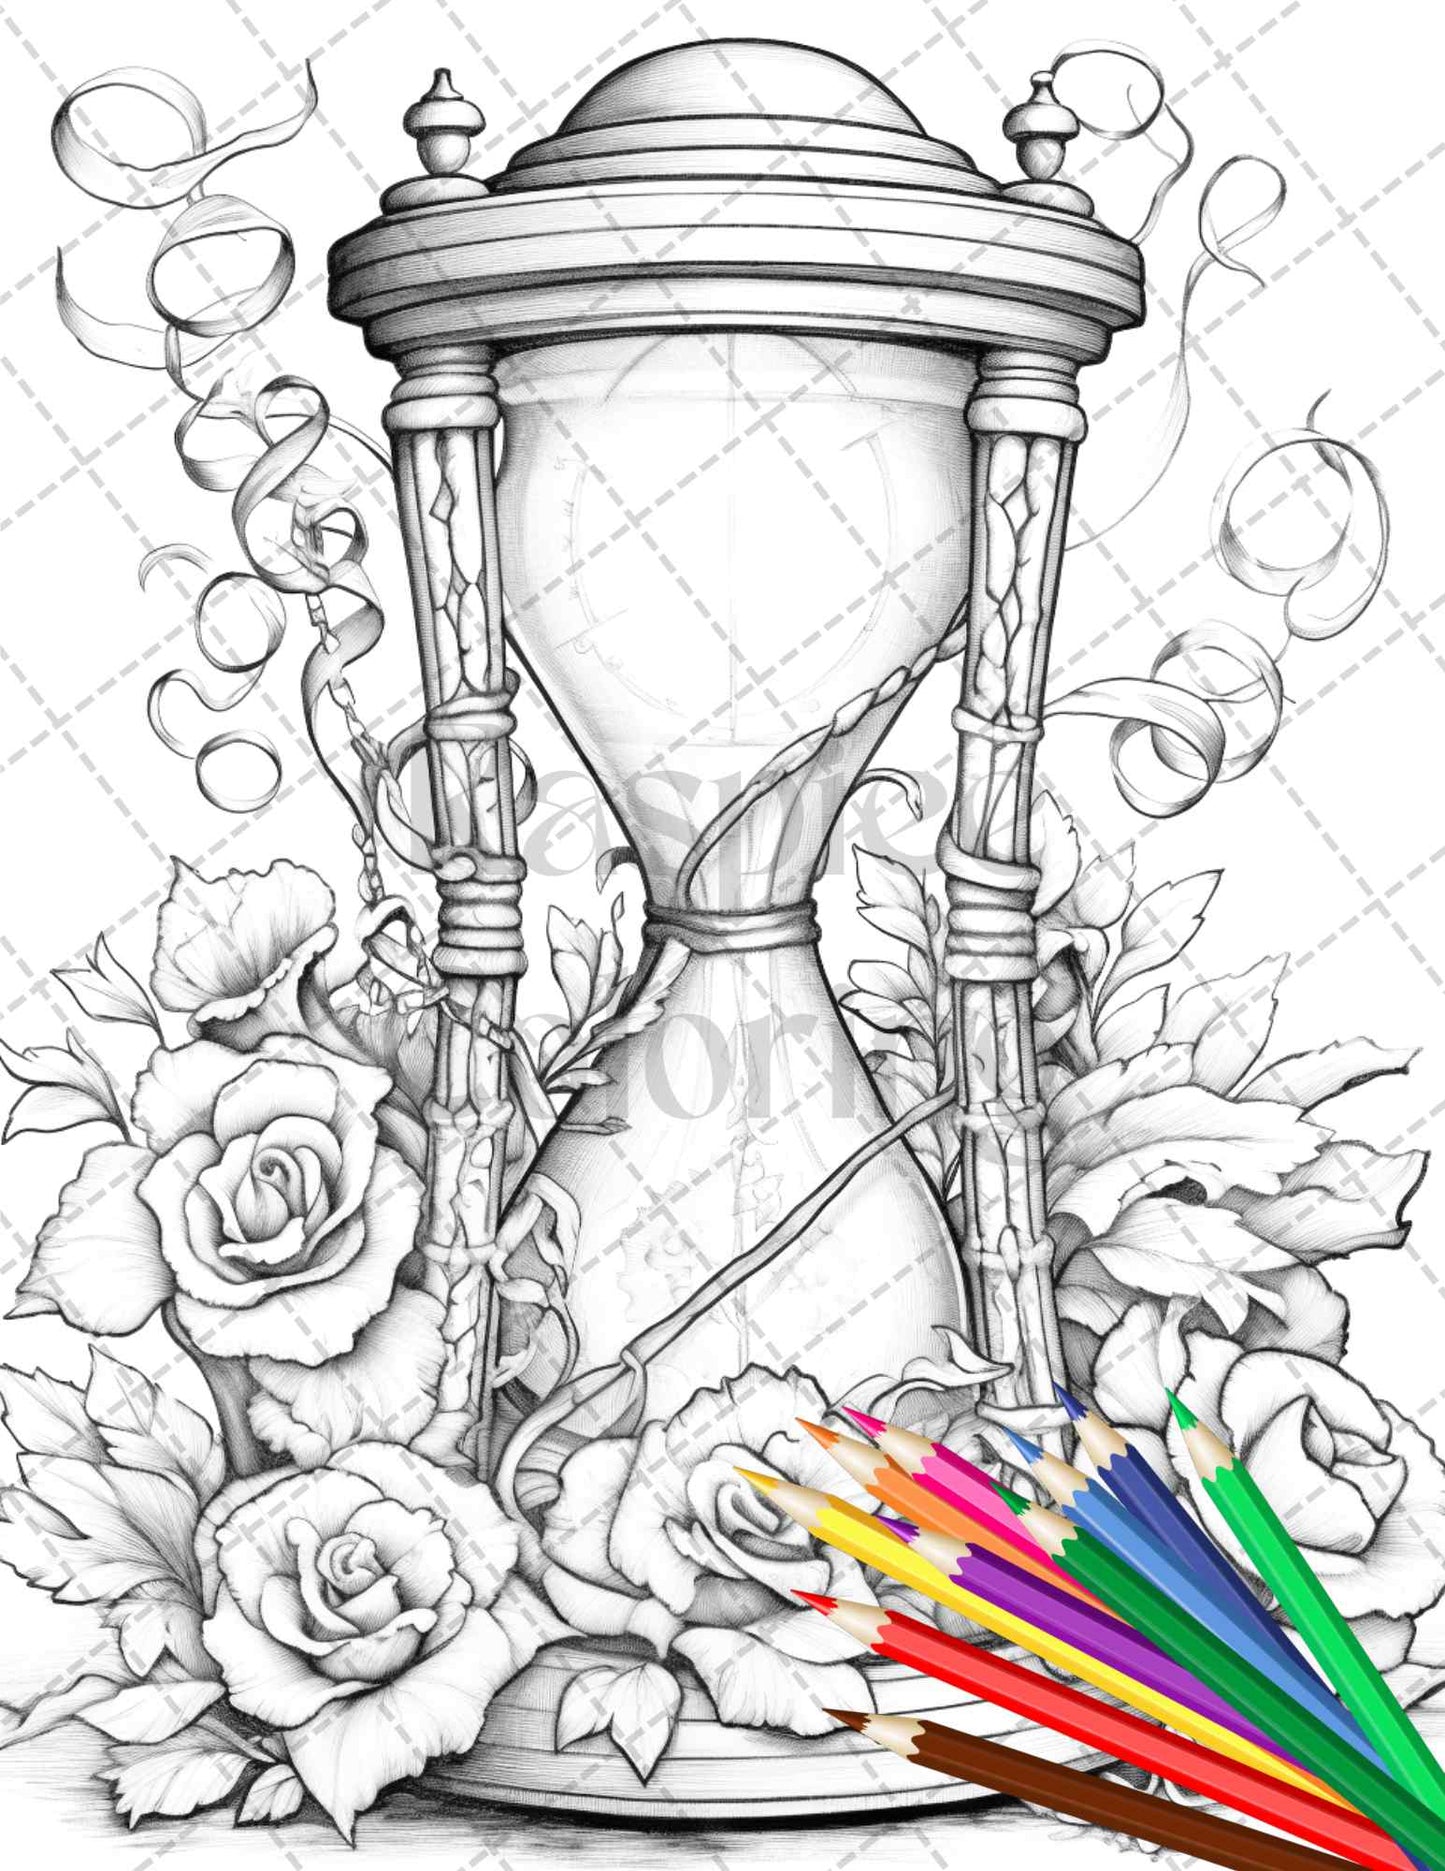 40 Vintage Objects Grayscale Coloring Pages Printable for Adults, PDF File Instant Download - raspiee